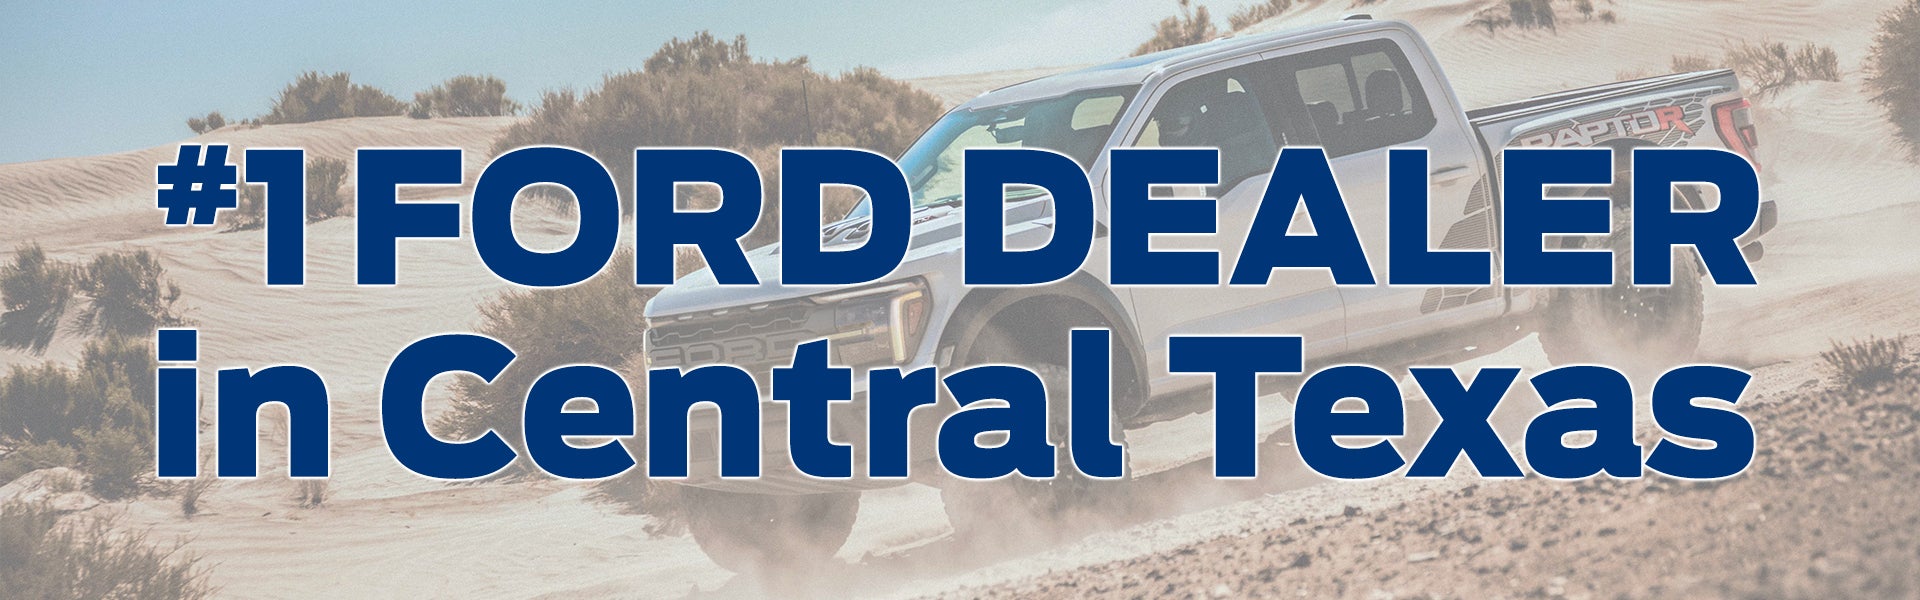 #1 Ford Dealer in Central Texas is in Austin